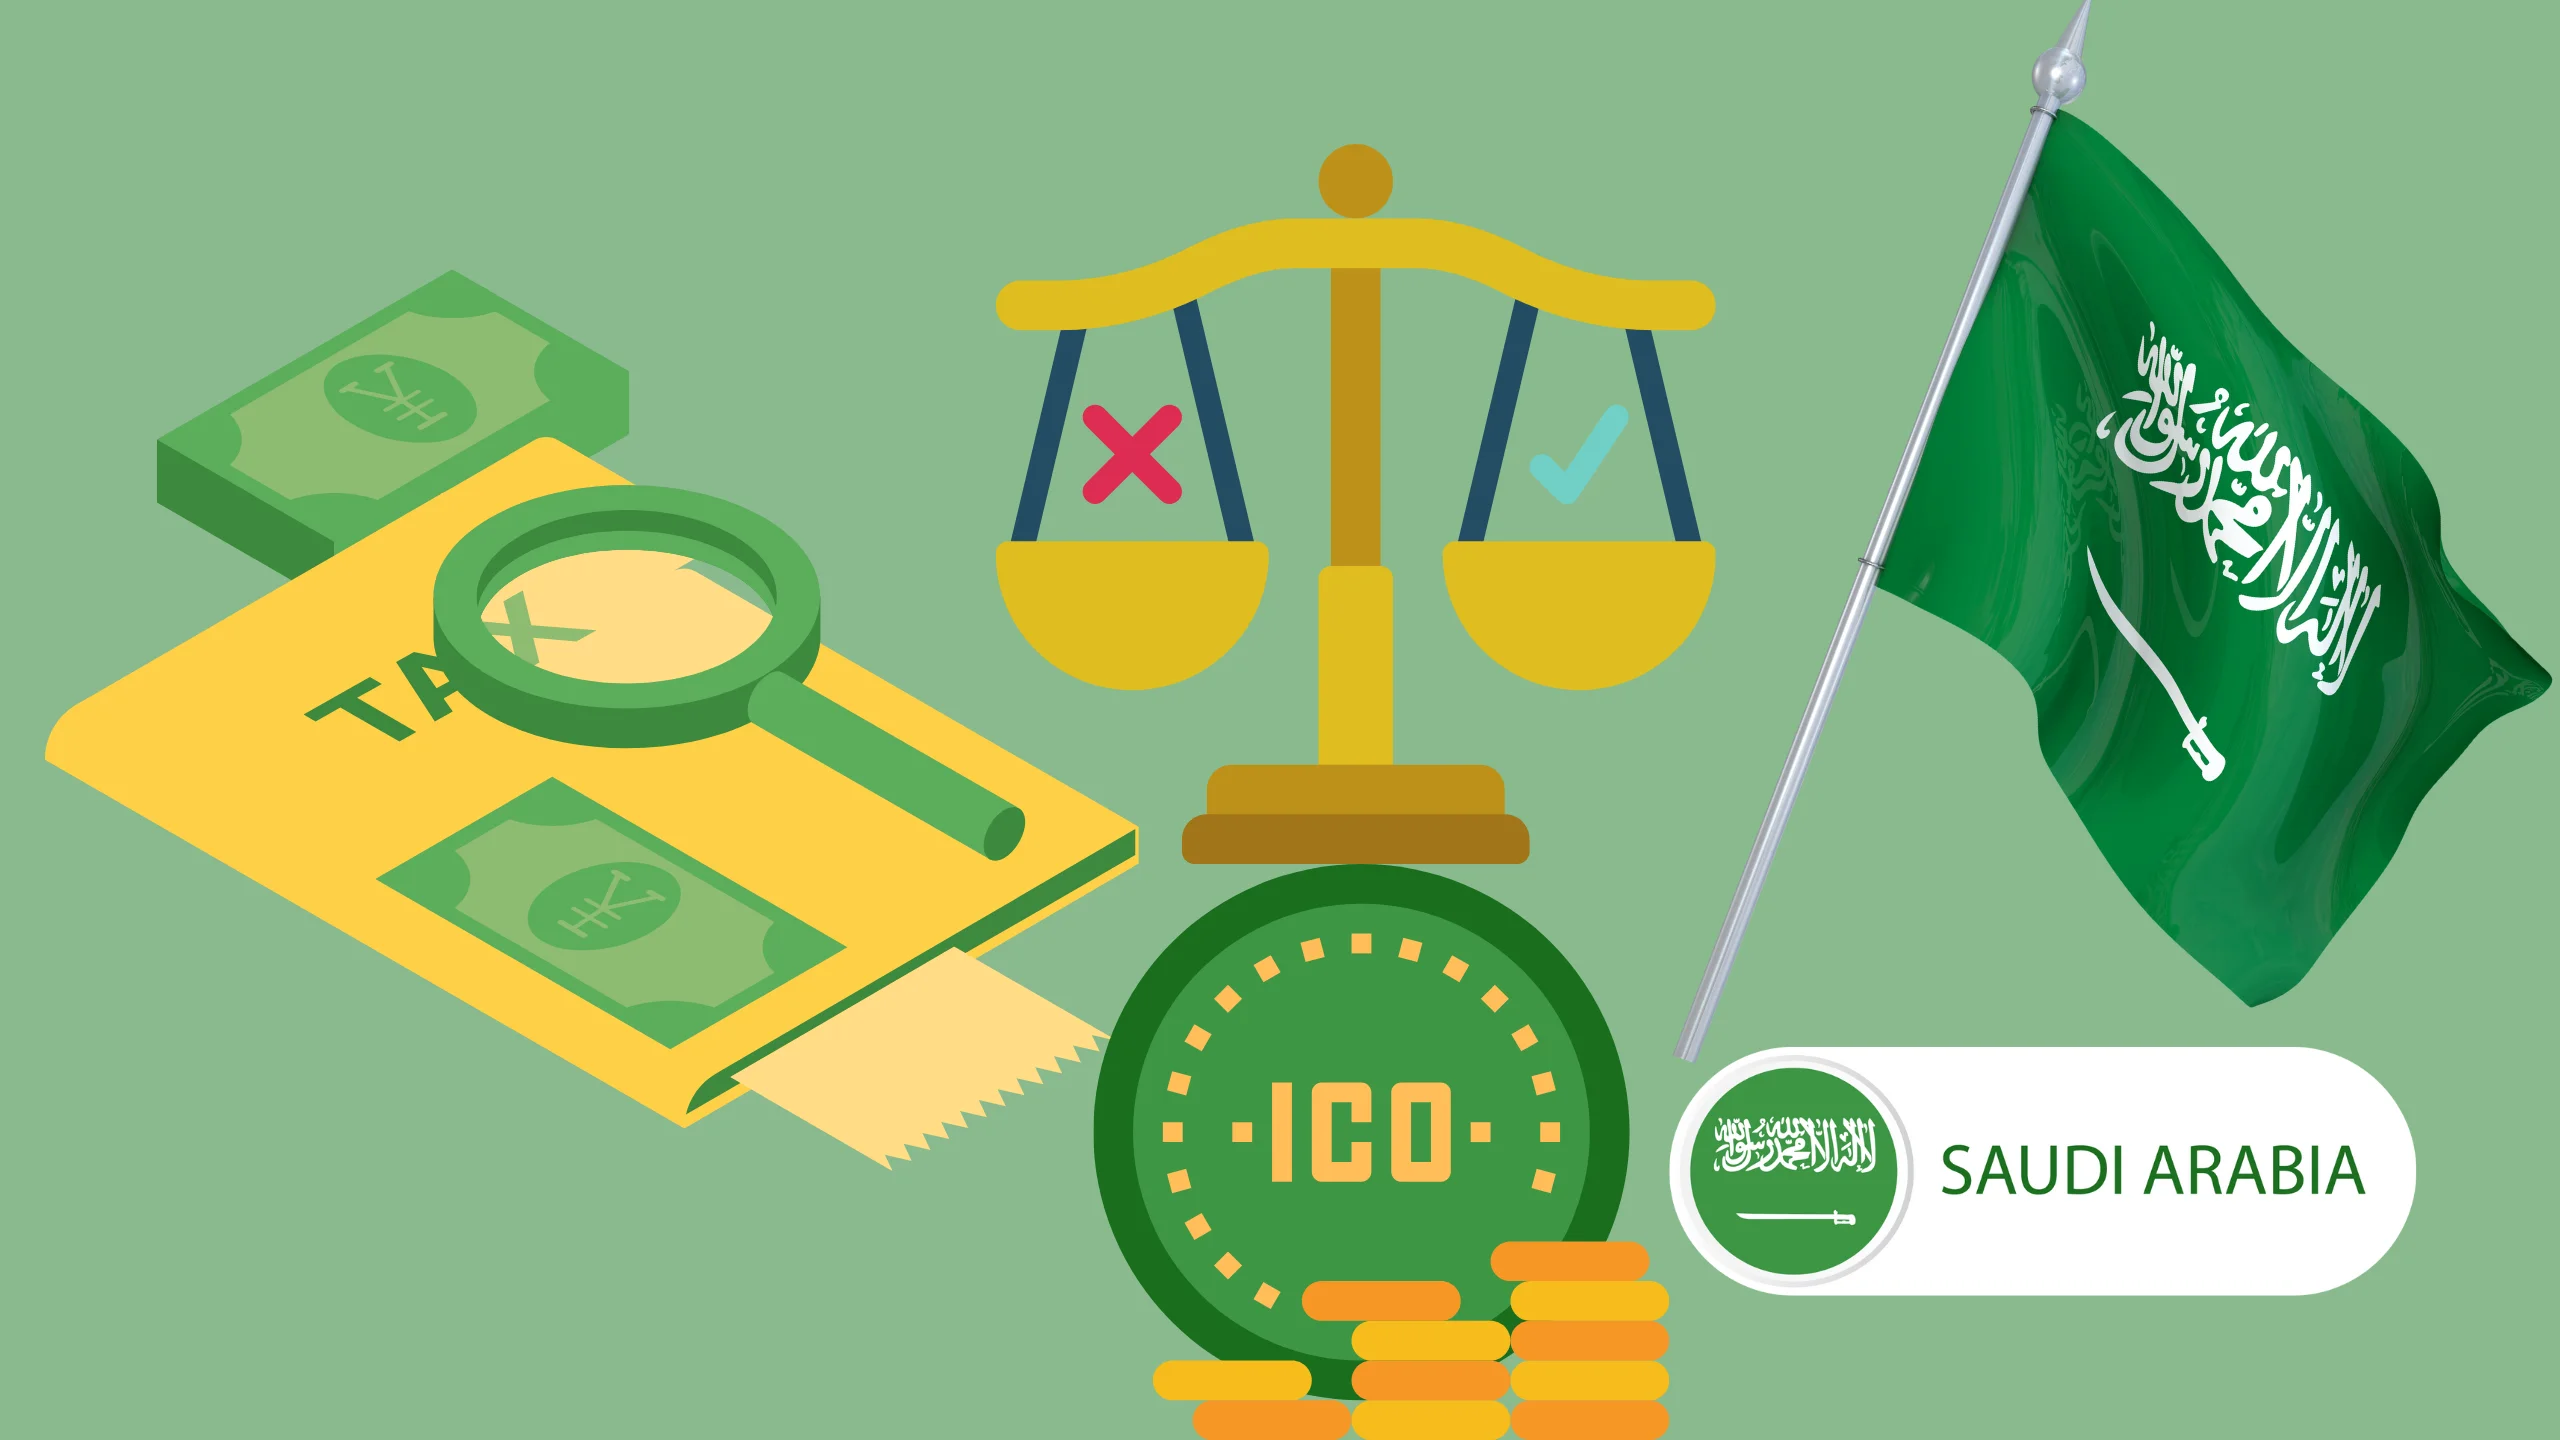 Illustration of tax considerations for ICOs in Saudi Arabia, including regulatory compliance, reporting obligations, and tax liabilities. Highlights key issues such as zakat, VAT, and guidelines from the Saudi tax authority for cryptocurrency transactions.